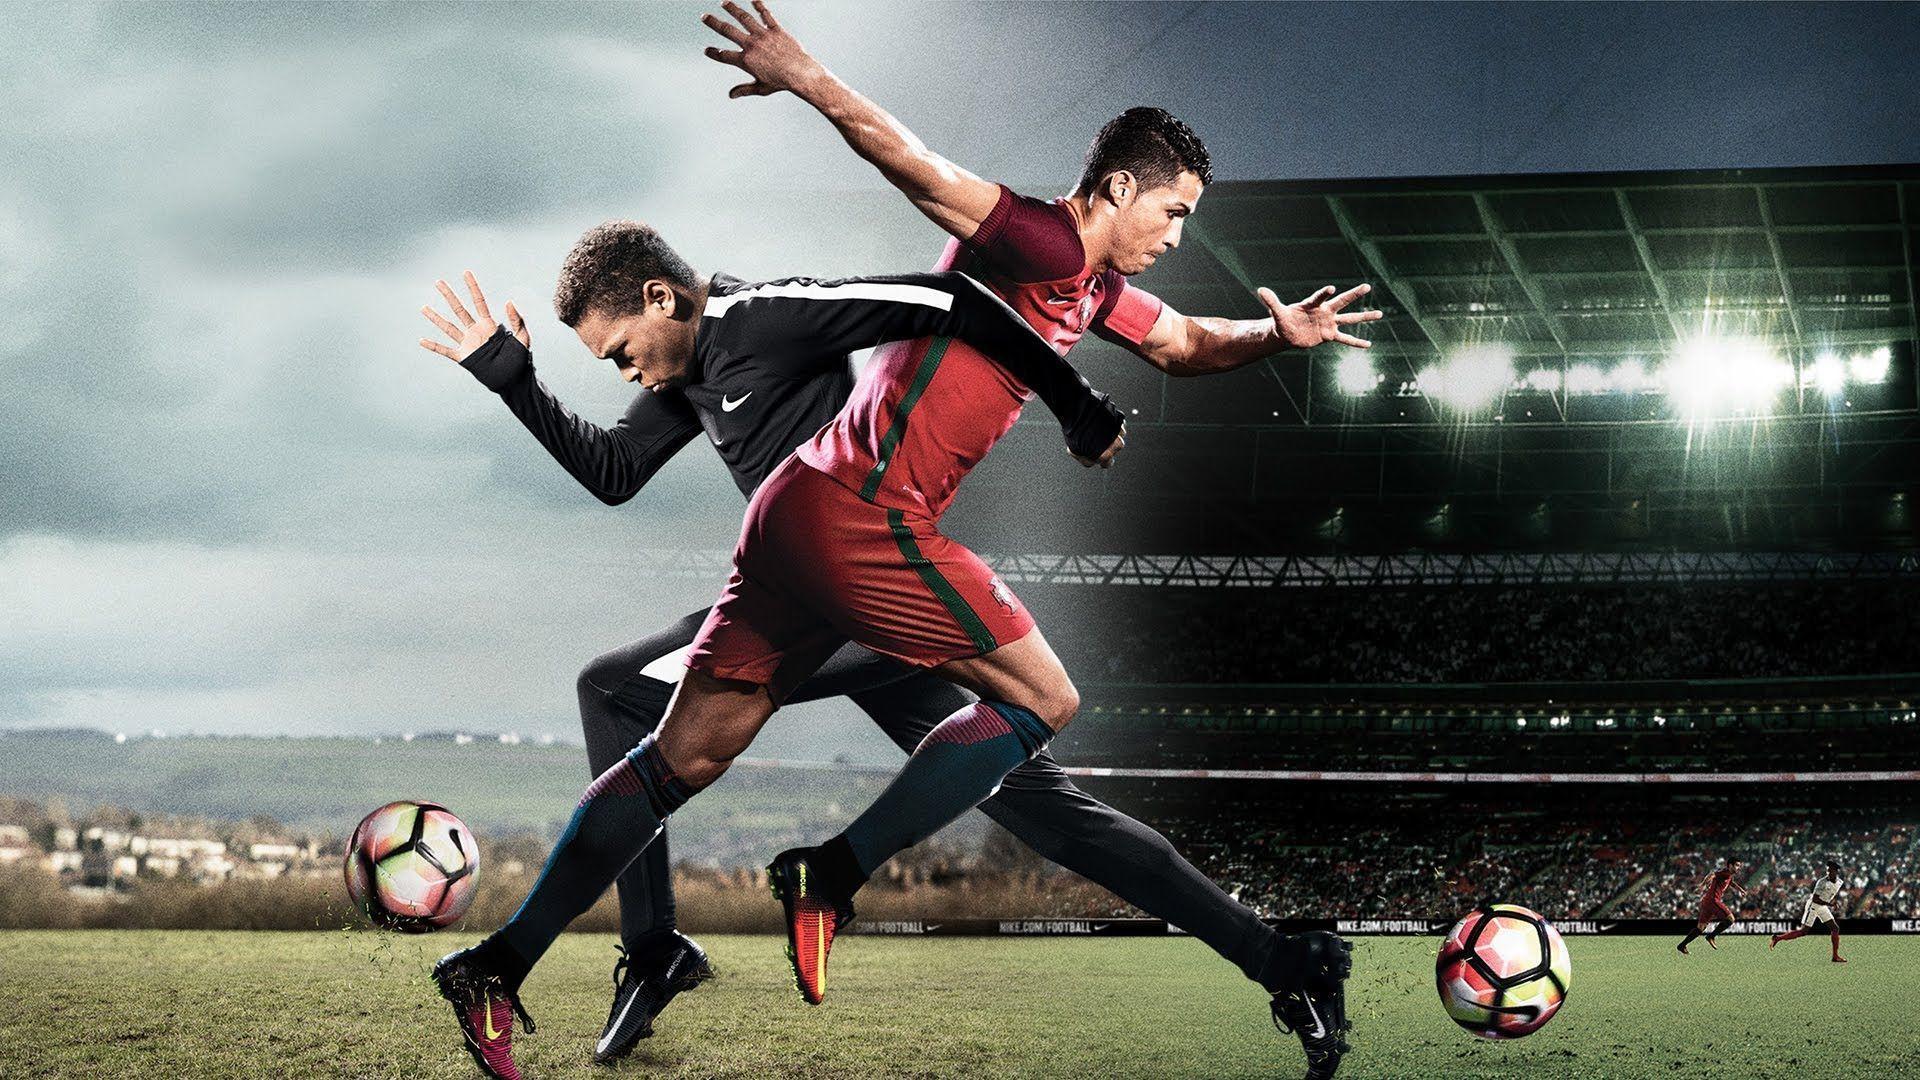 Cristiano Ronaldo New Nike Commercial Switch 2016 ft